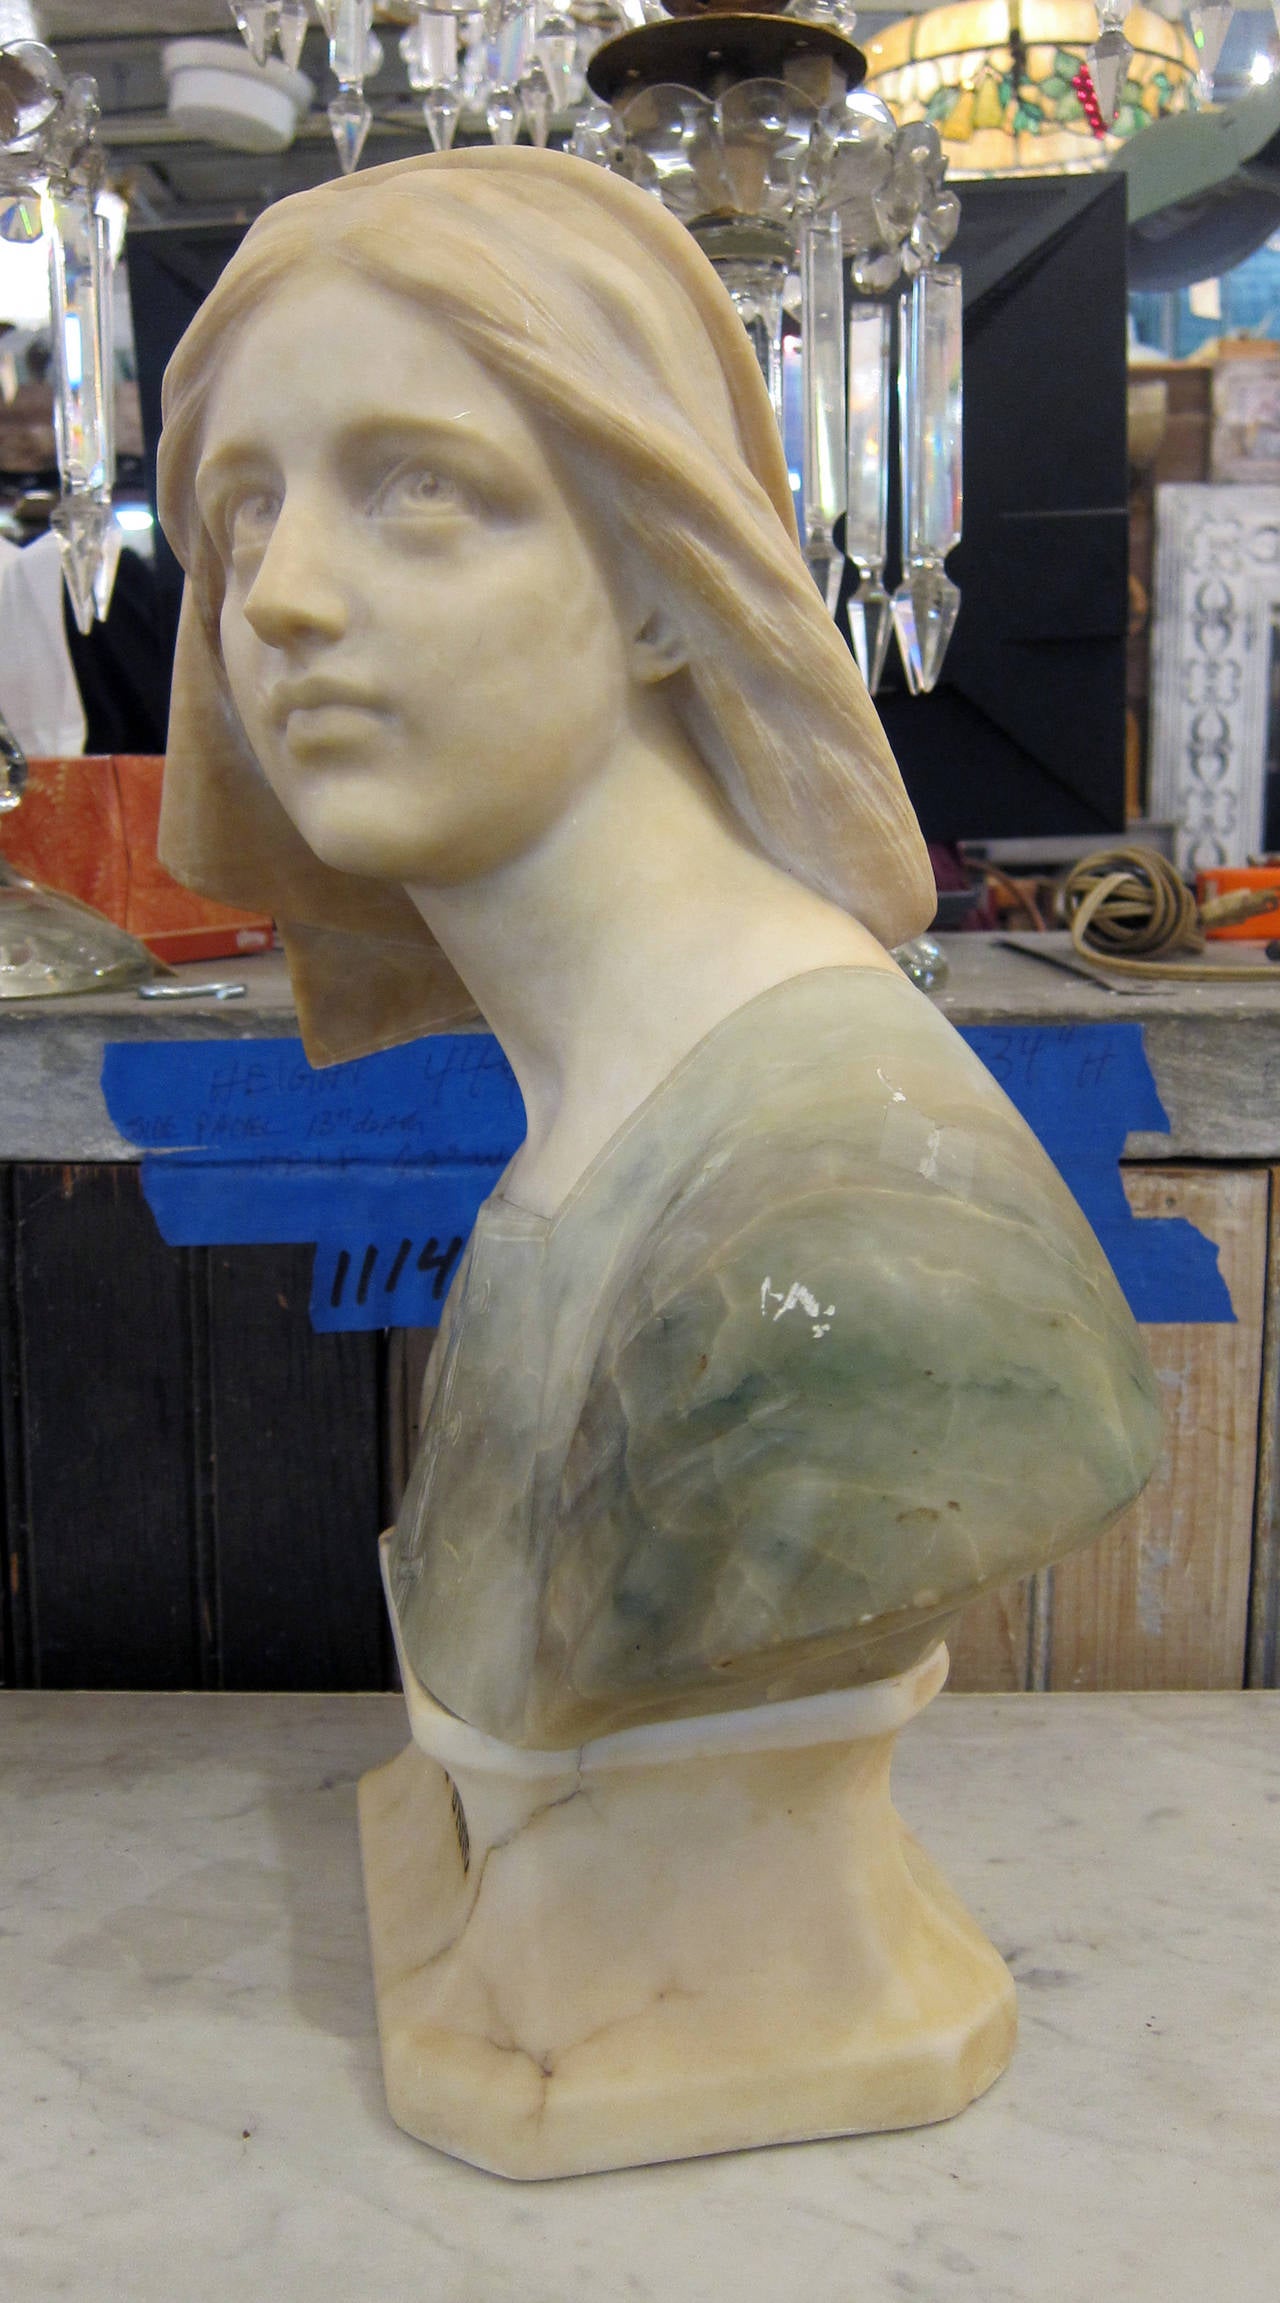 Light blue alabaster and white marble make up this bust of Joan of Arc. Carved on the bust is 